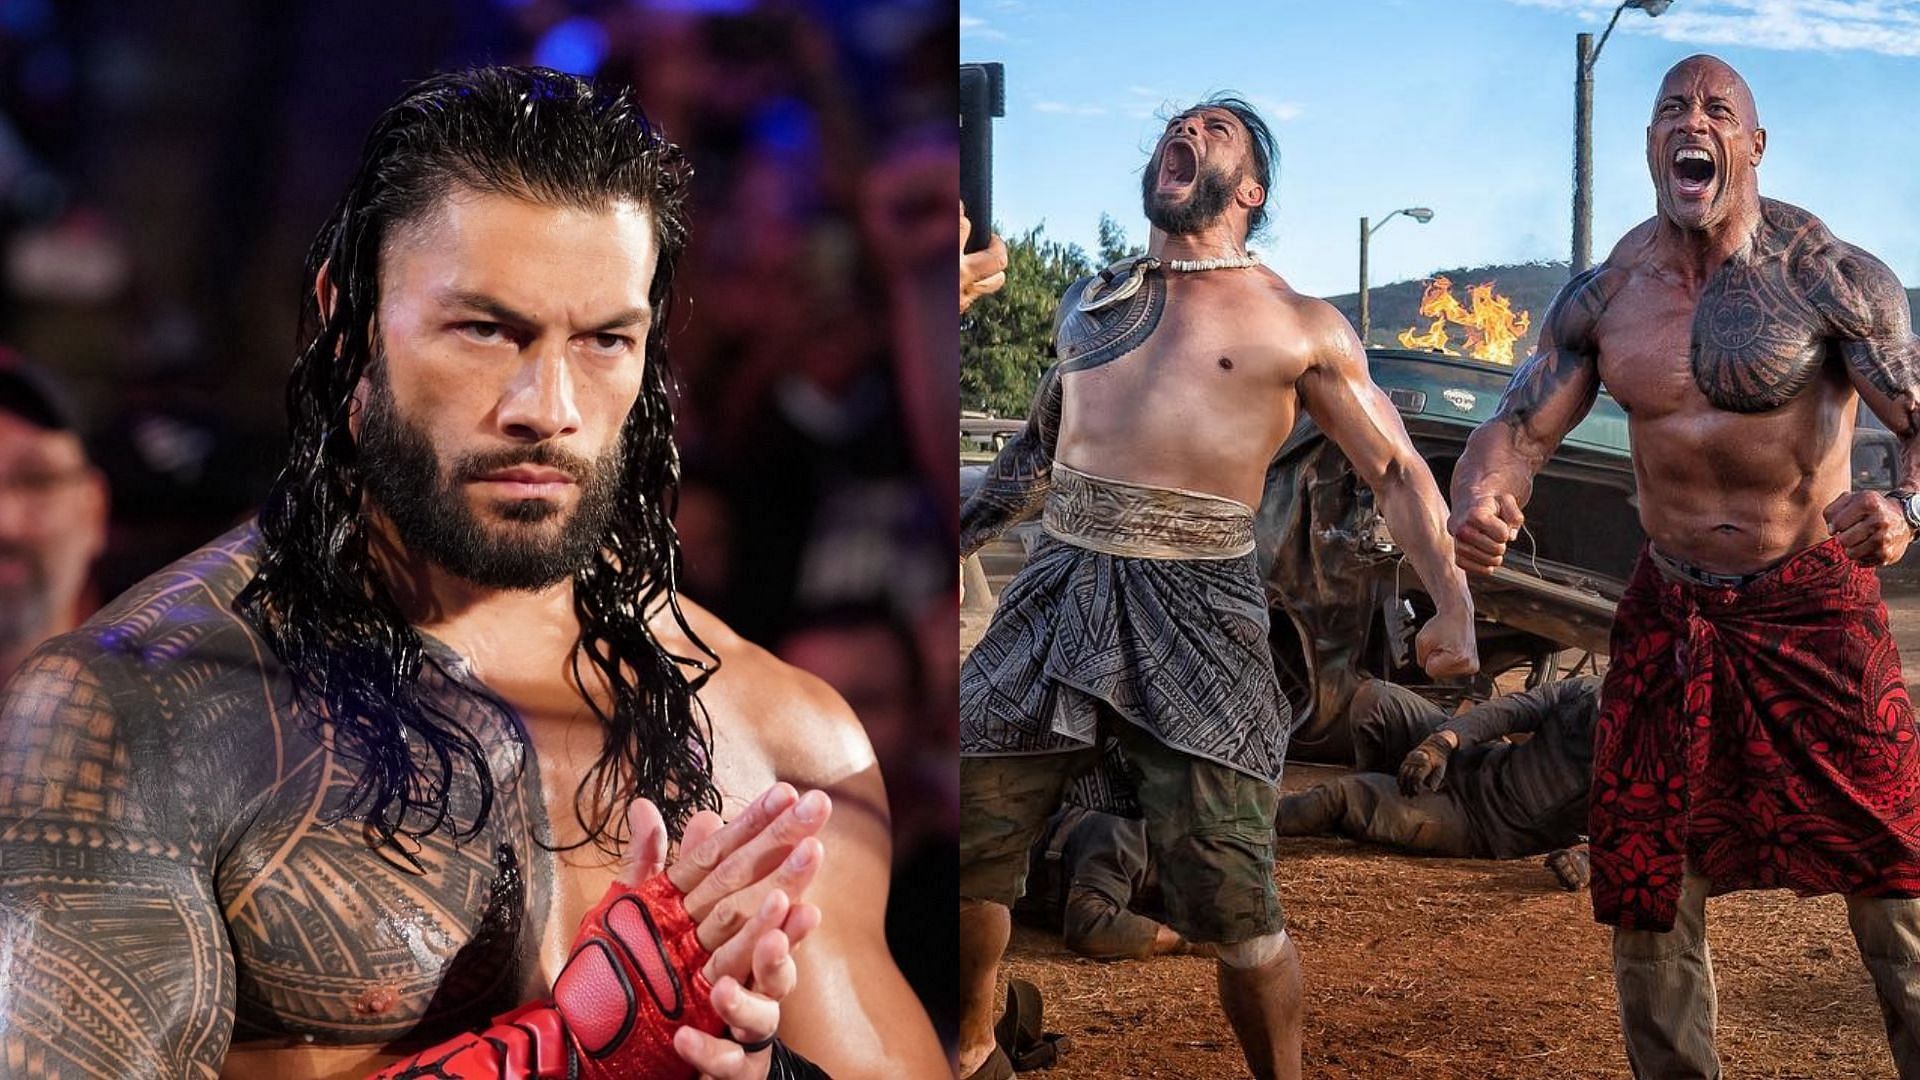 What role did Roman Reigns play in Dwayne Johnson's Hobbs and Shaw?